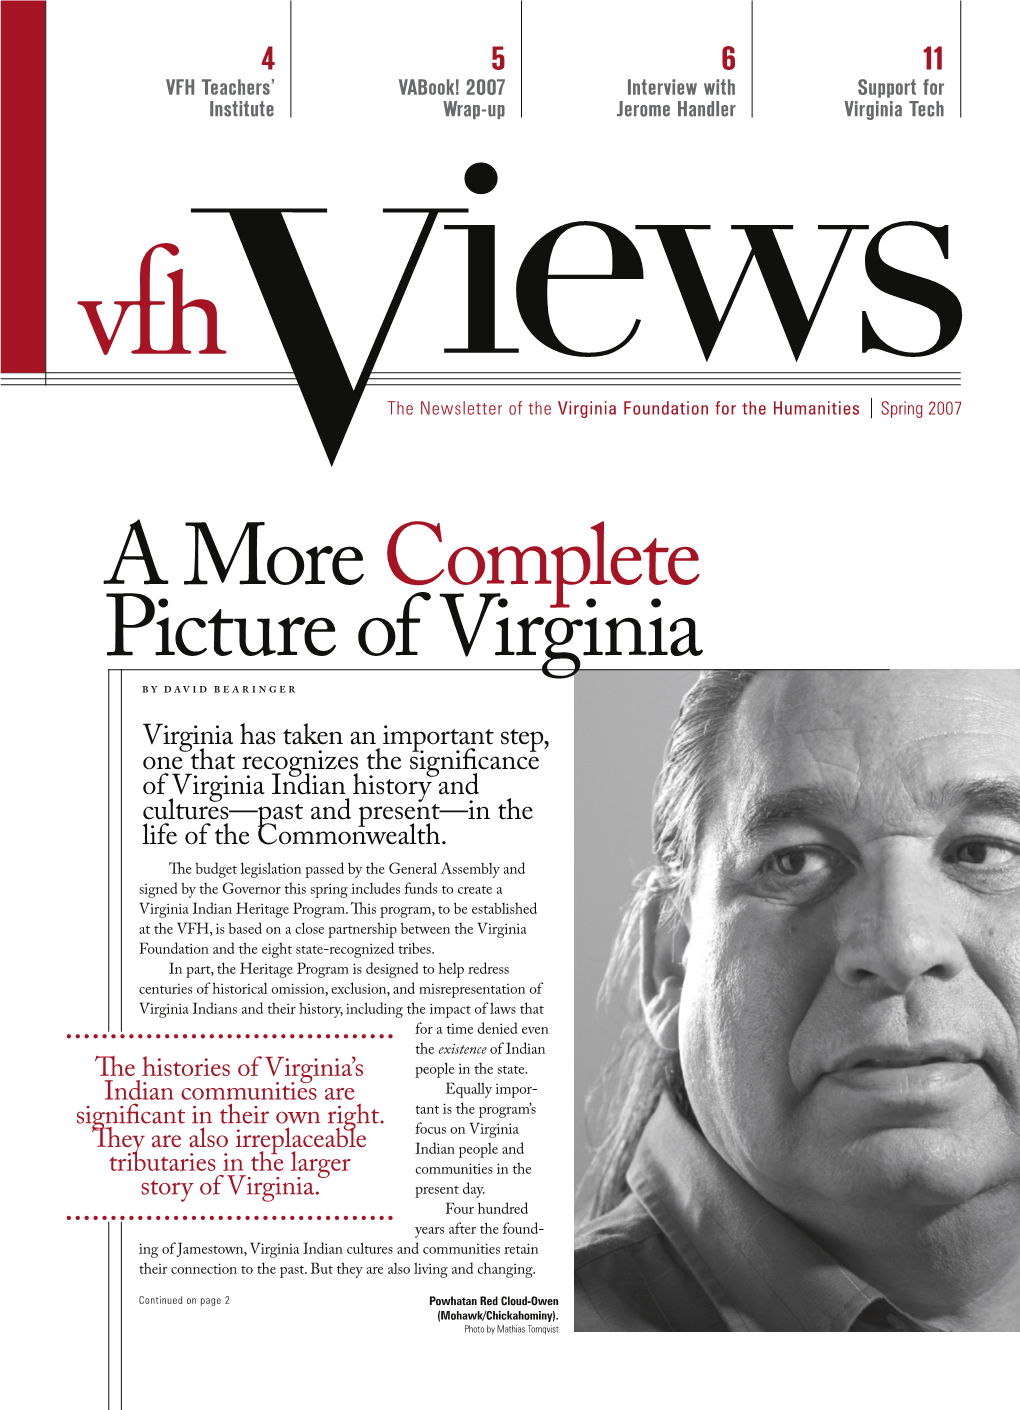 Virginia Indian History and Cultures—Past and Present—In the Life of the Commonwealth